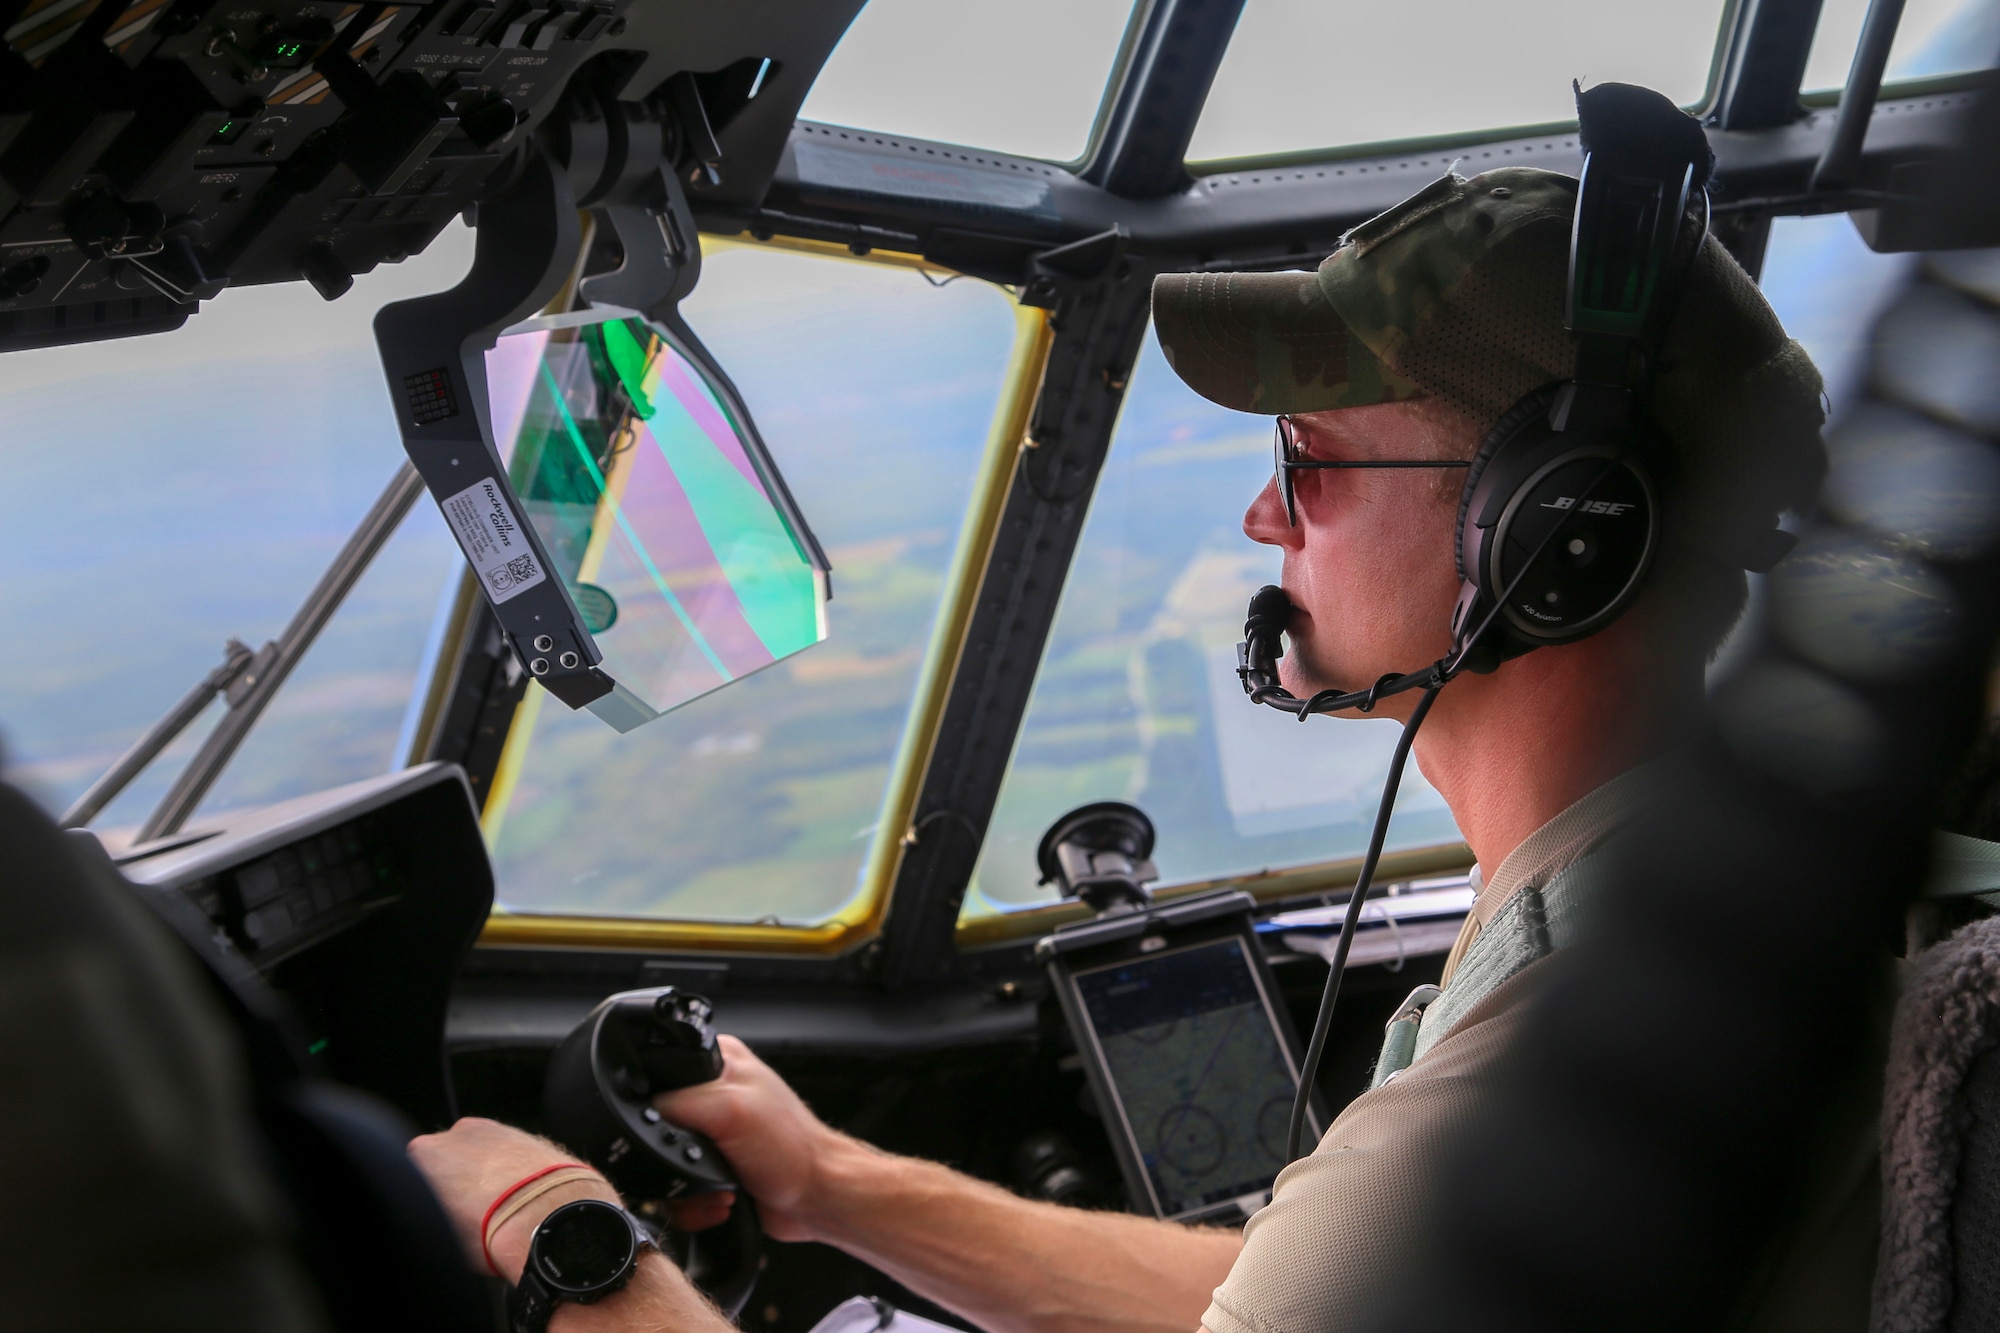 Alaska Air National Guard Capt. Matthew Soukup, a pilot with the 176th Wing’s 211th Rescue Squadron, searches for isolated flood survivors aboard an HC-130J Combat King II aircraft while assisting with hurricane relief operations in North Carolina, Sept. 17, 2018.